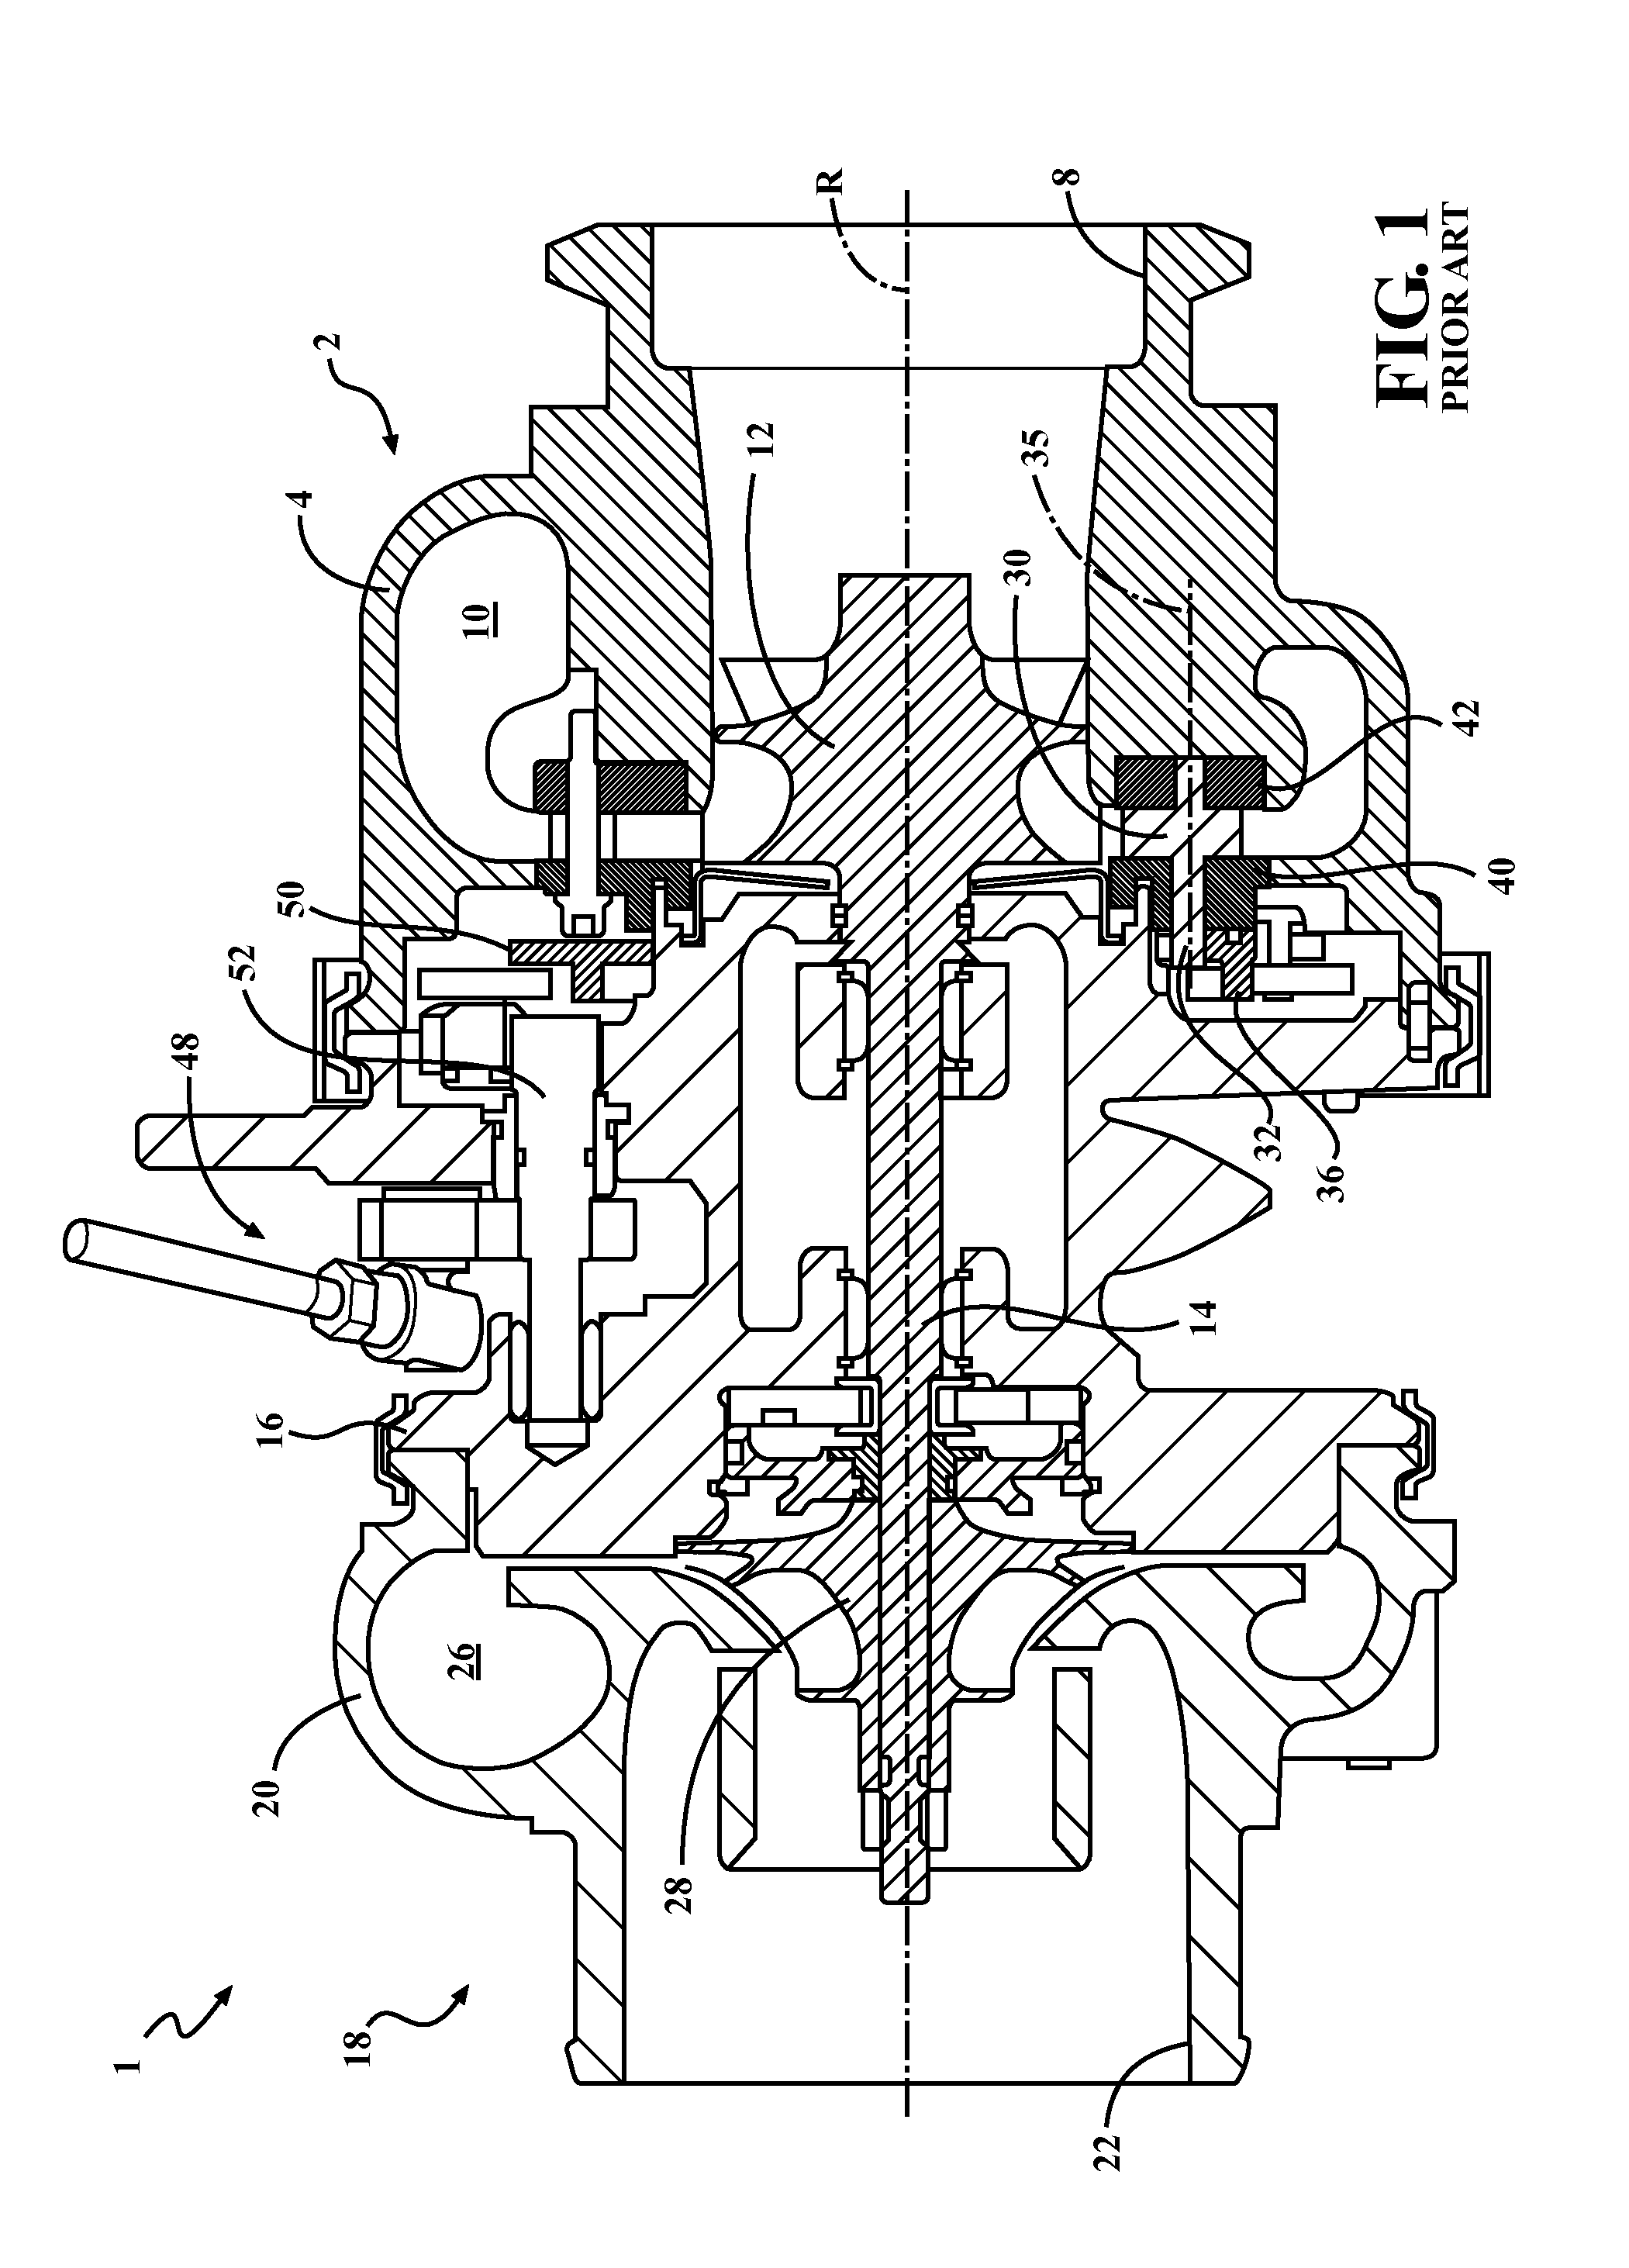 Actuating mechanism and gear driven adjustment ring for a variable geometry turbocharger